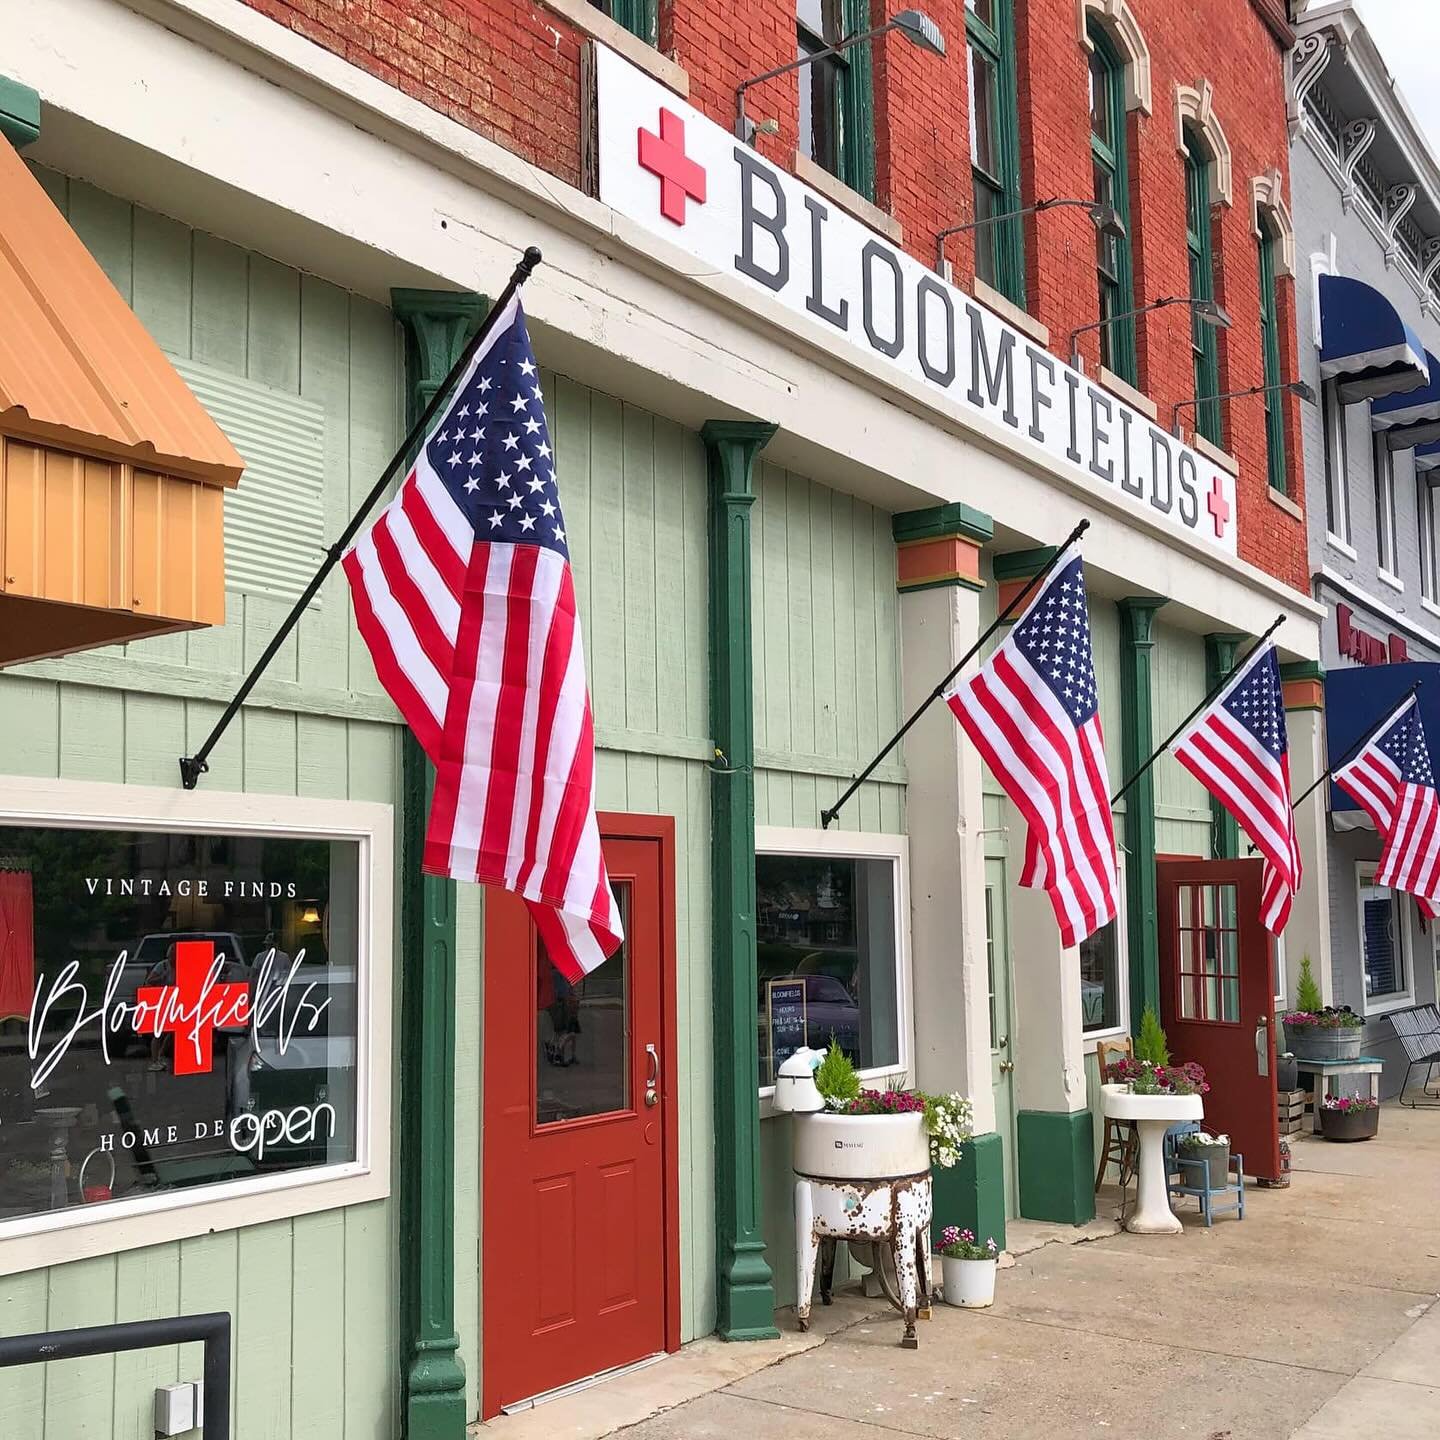 No weekend plans? Here is your GUIDE to the Rockville Square! Hoosier hospitality, shopping, antiques, delicious eats, and much more. ❤️

SHOPPING + ANTIQUES
✨ Aunt Patty&rsquo;s Antiques
✨ Bloomfields - Vintage Finds &amp; Home Decor
✨ Chelsea&rsquo